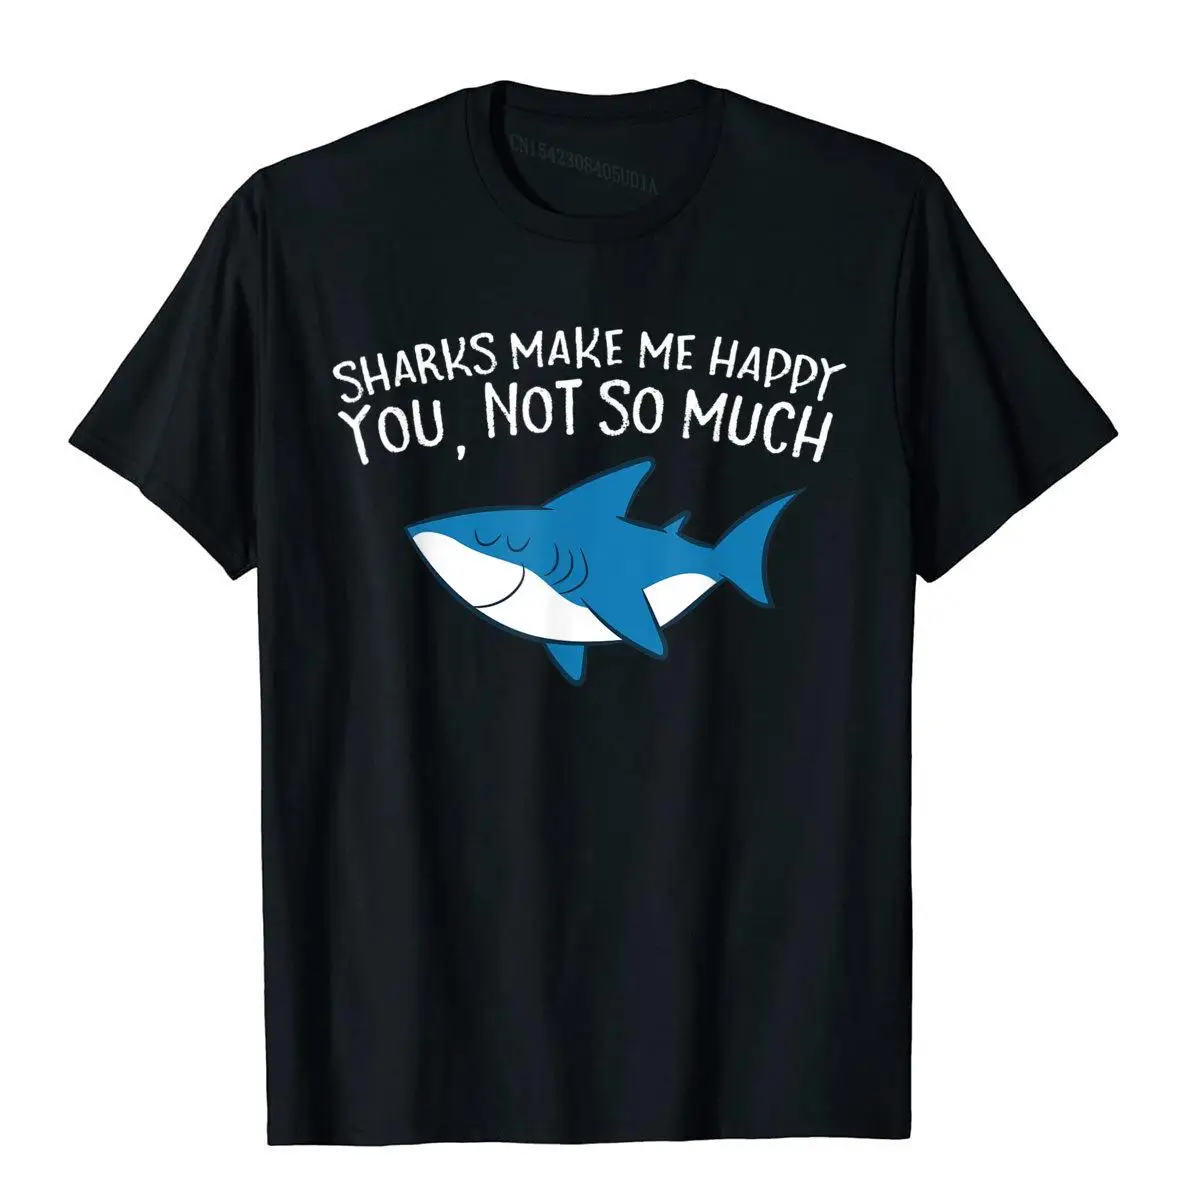 

Sharks Make Me Happy You Not So Much Funny Sharks T-Shirt Men Prevailing Camisa T Shirt Cotton T Shirts Fitness